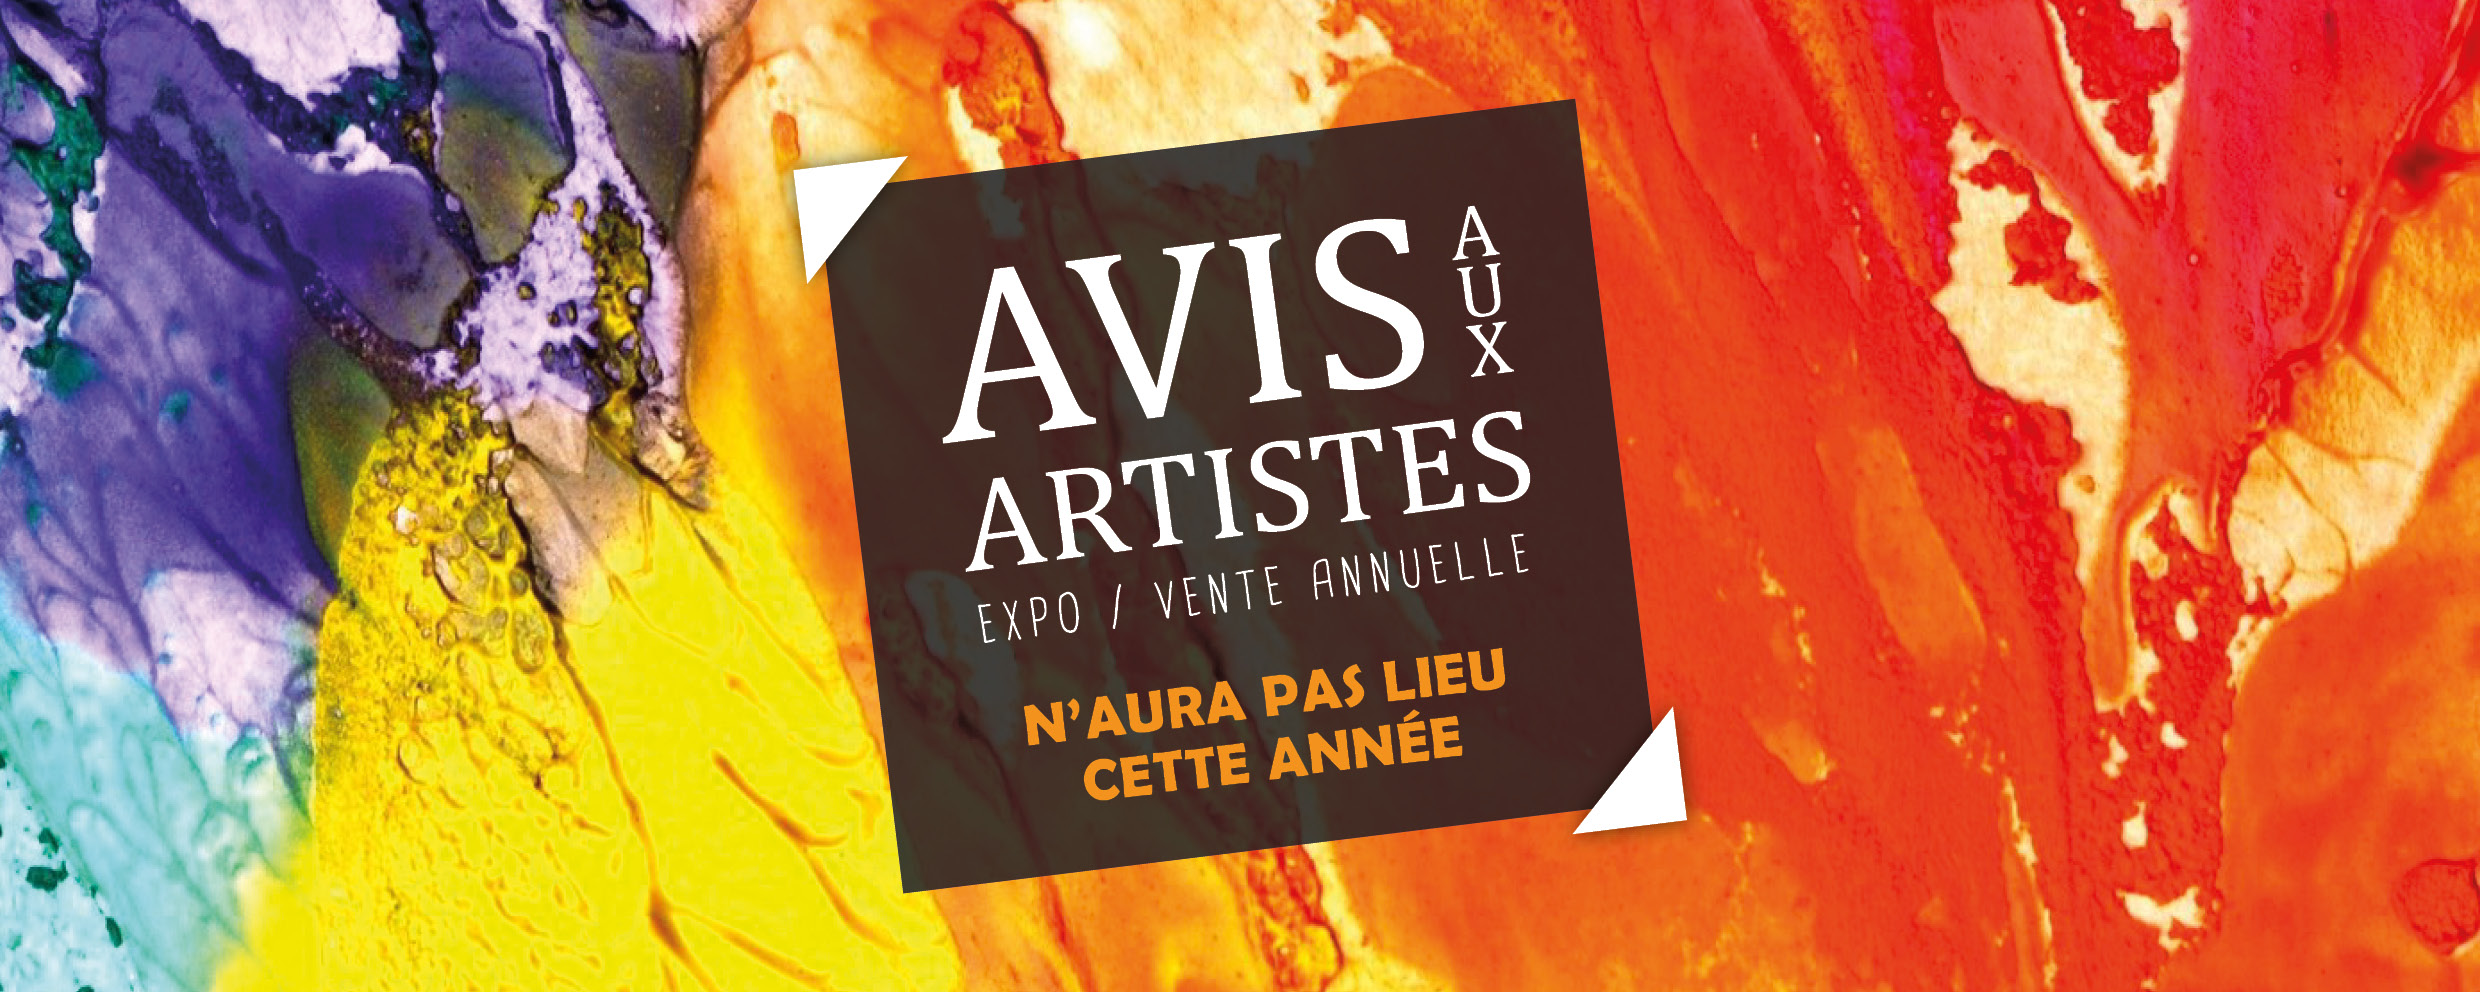 You are currently viewing “Avis aux Artistes” n’aura pas lieu